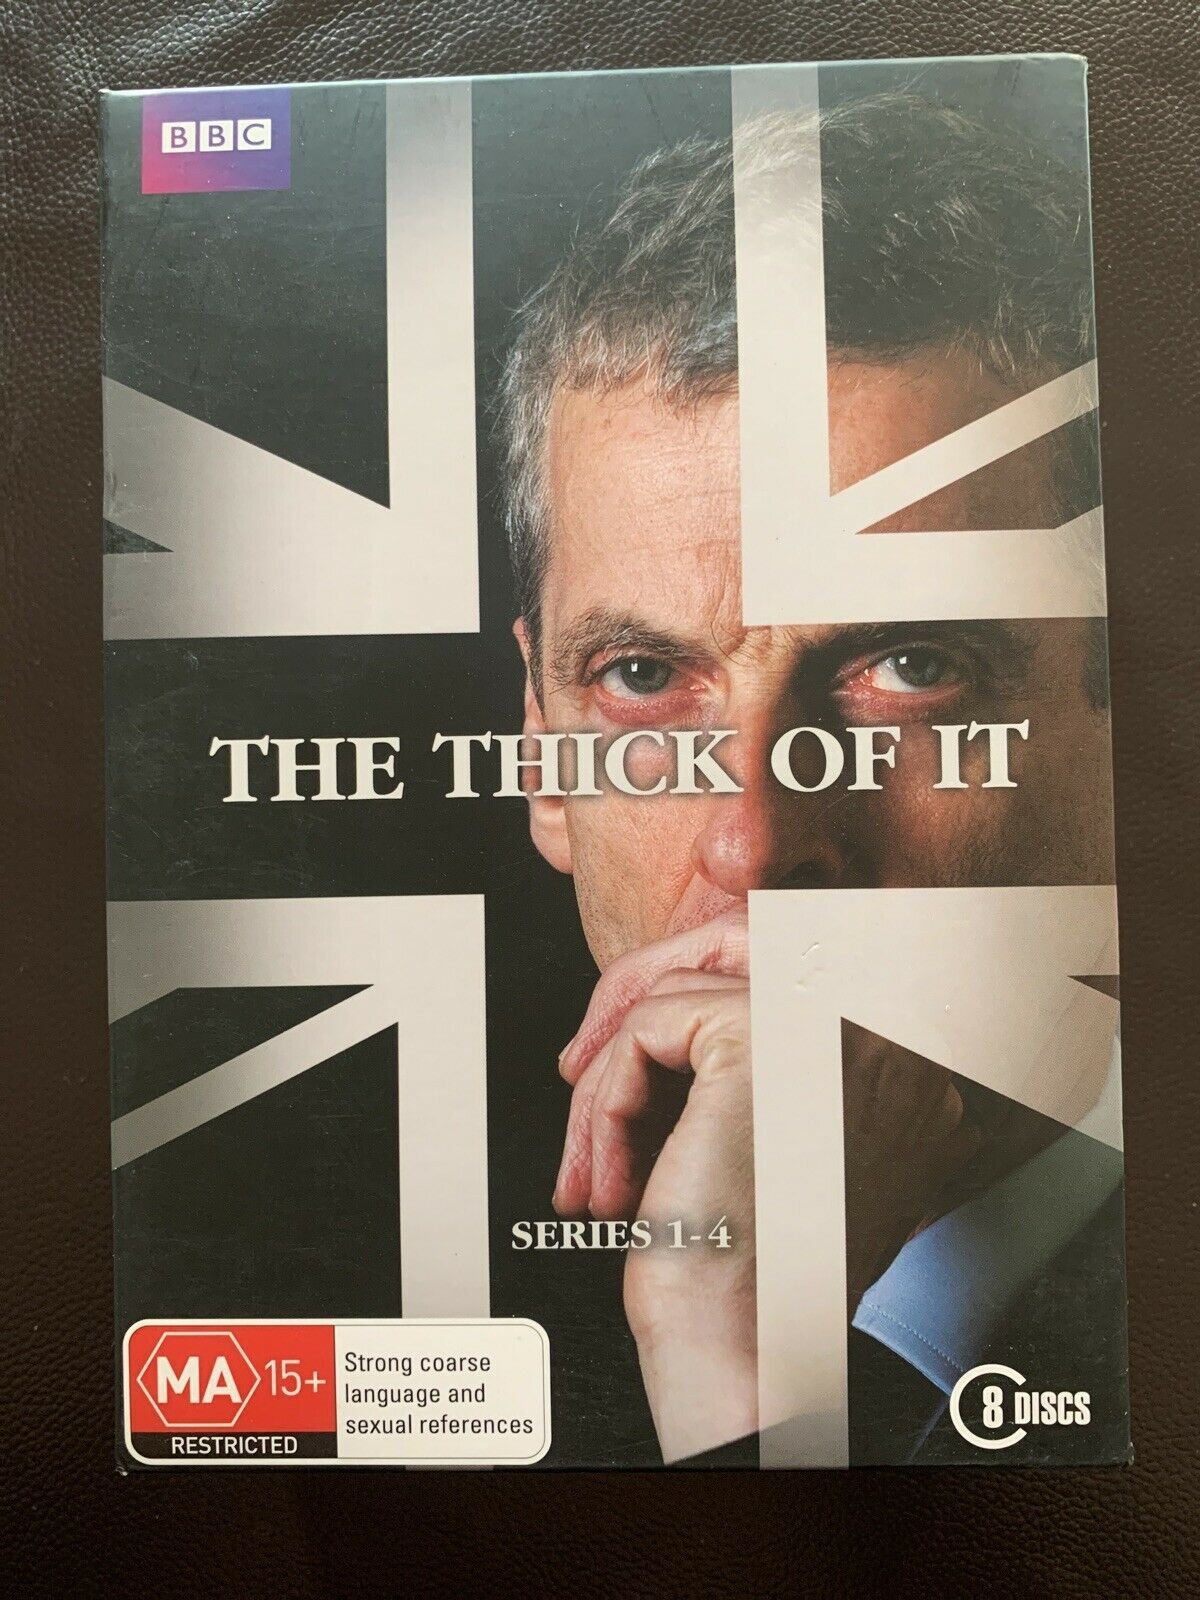 The Thick Of It : The Complete Series 1-4 (DVD, 2013, 8-Disc Set) Region 4